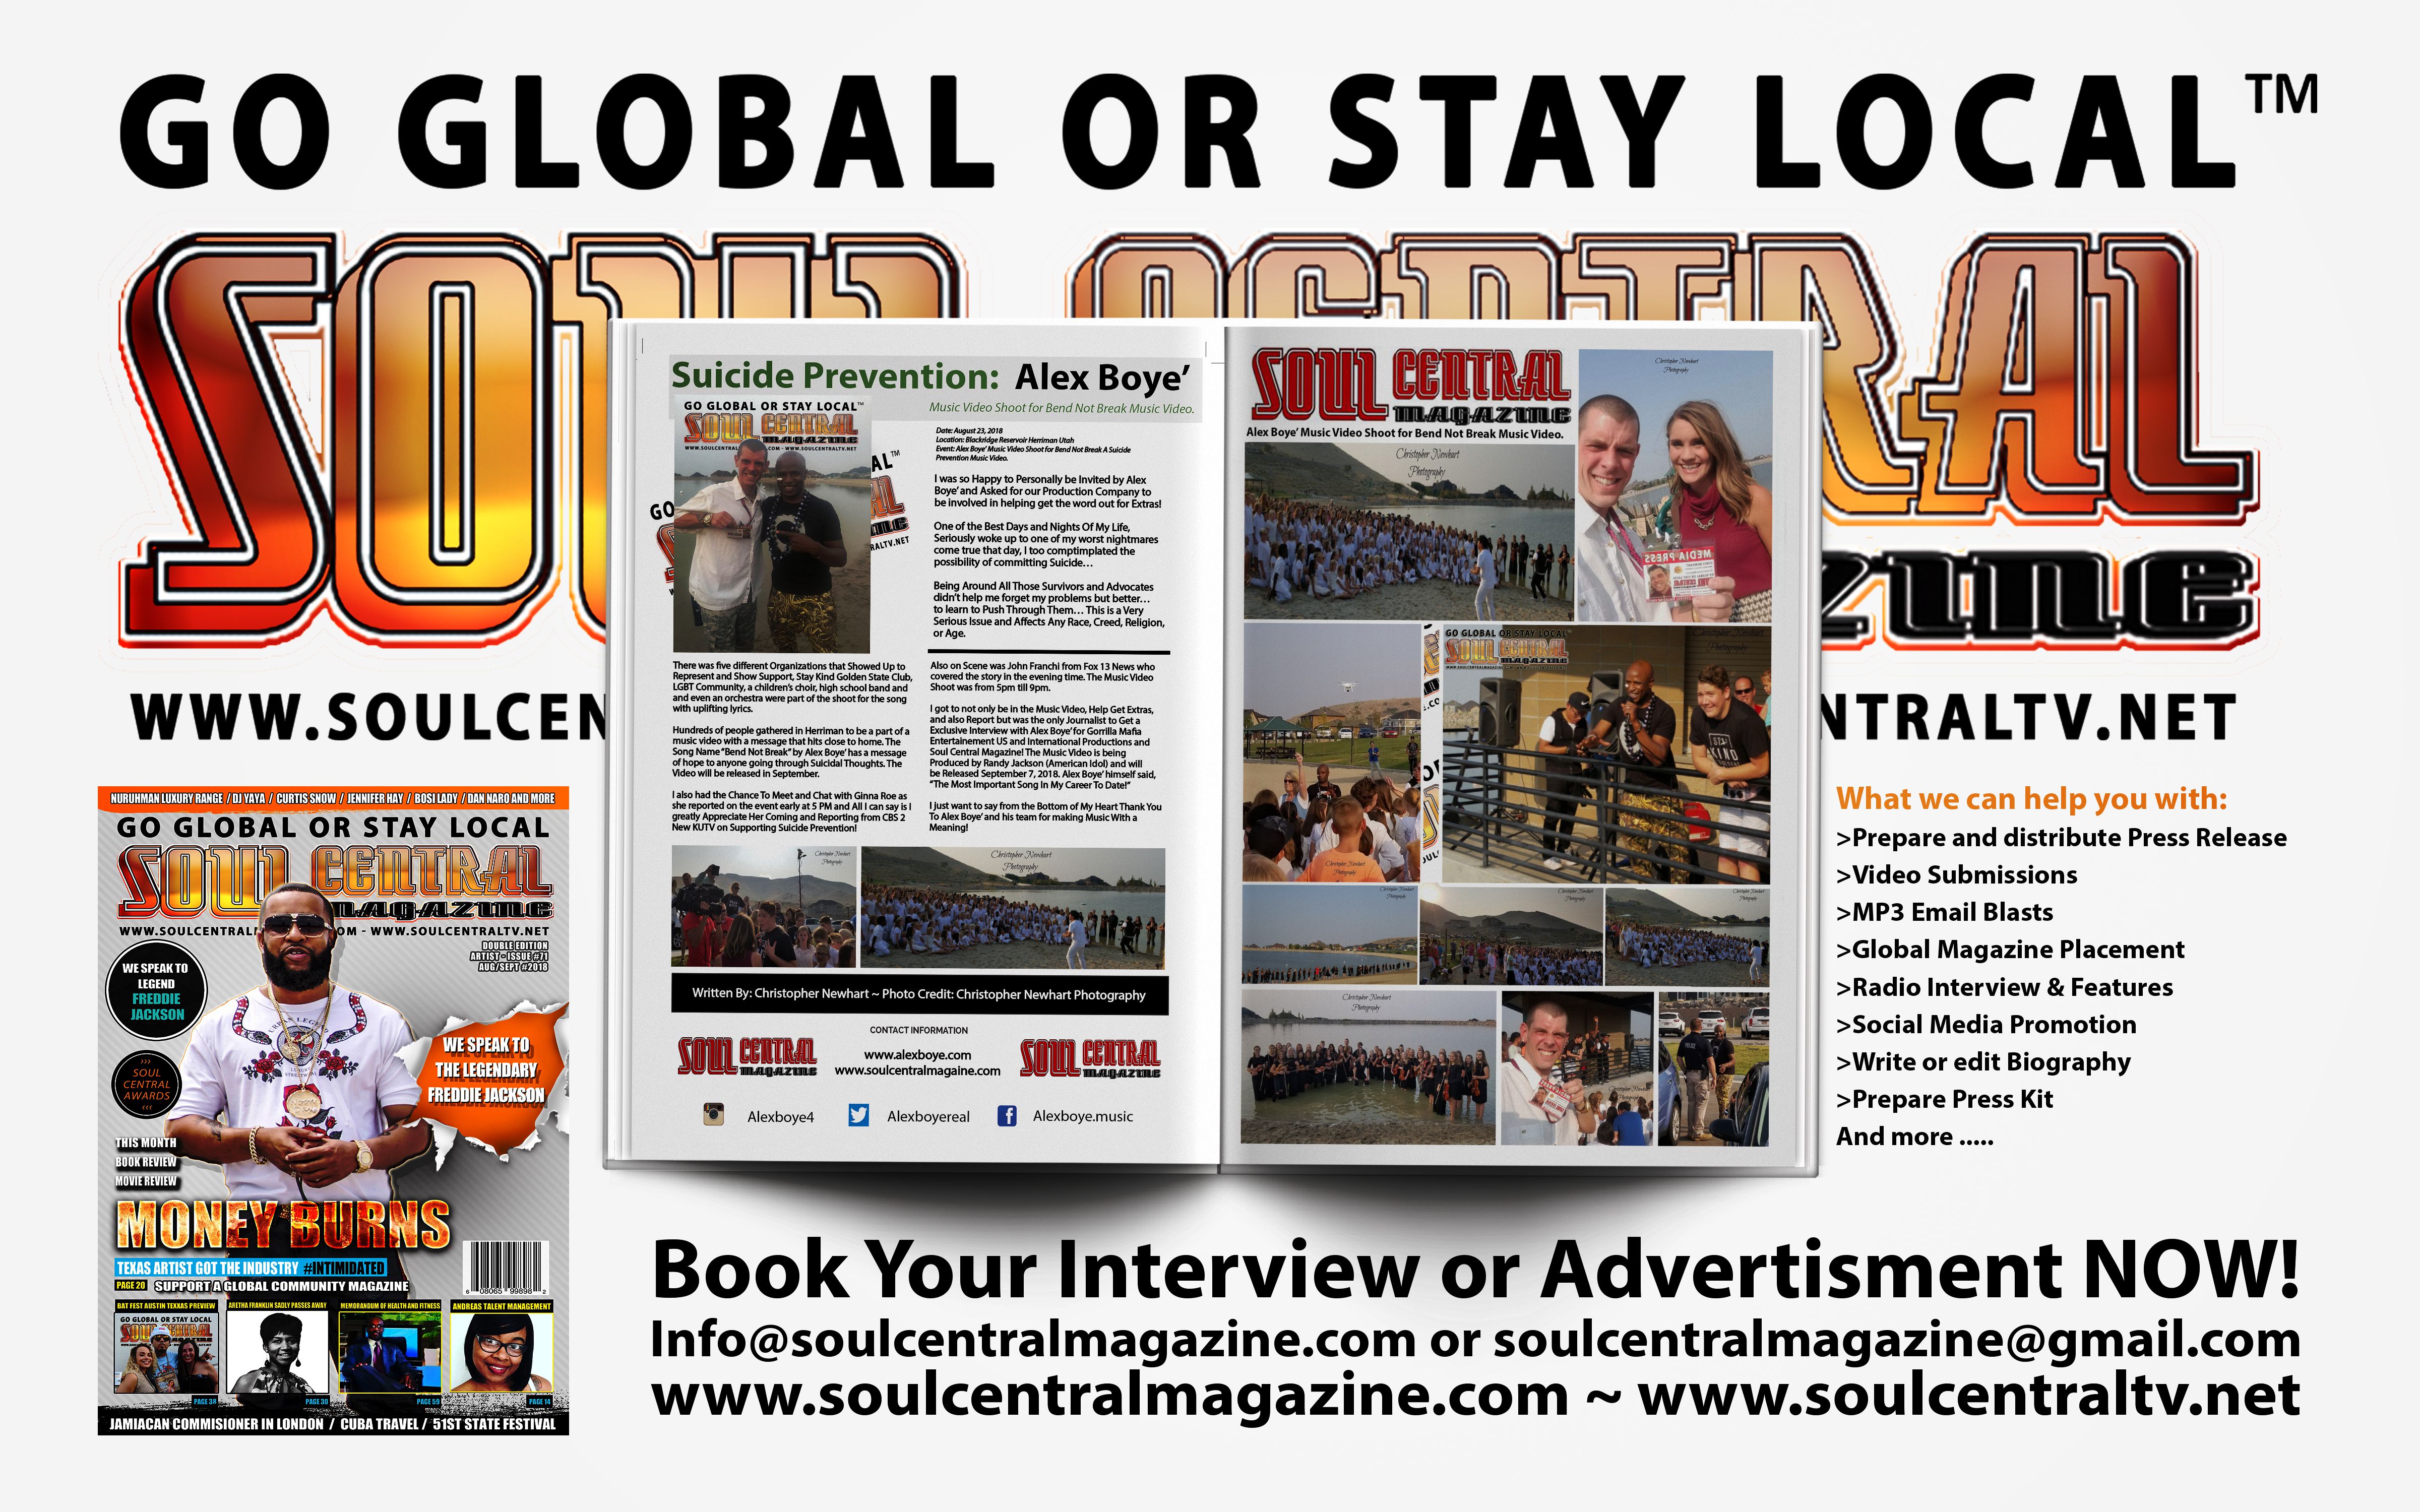 We are Soul Central Magazine / TV / Radio based in london What we can help you with: